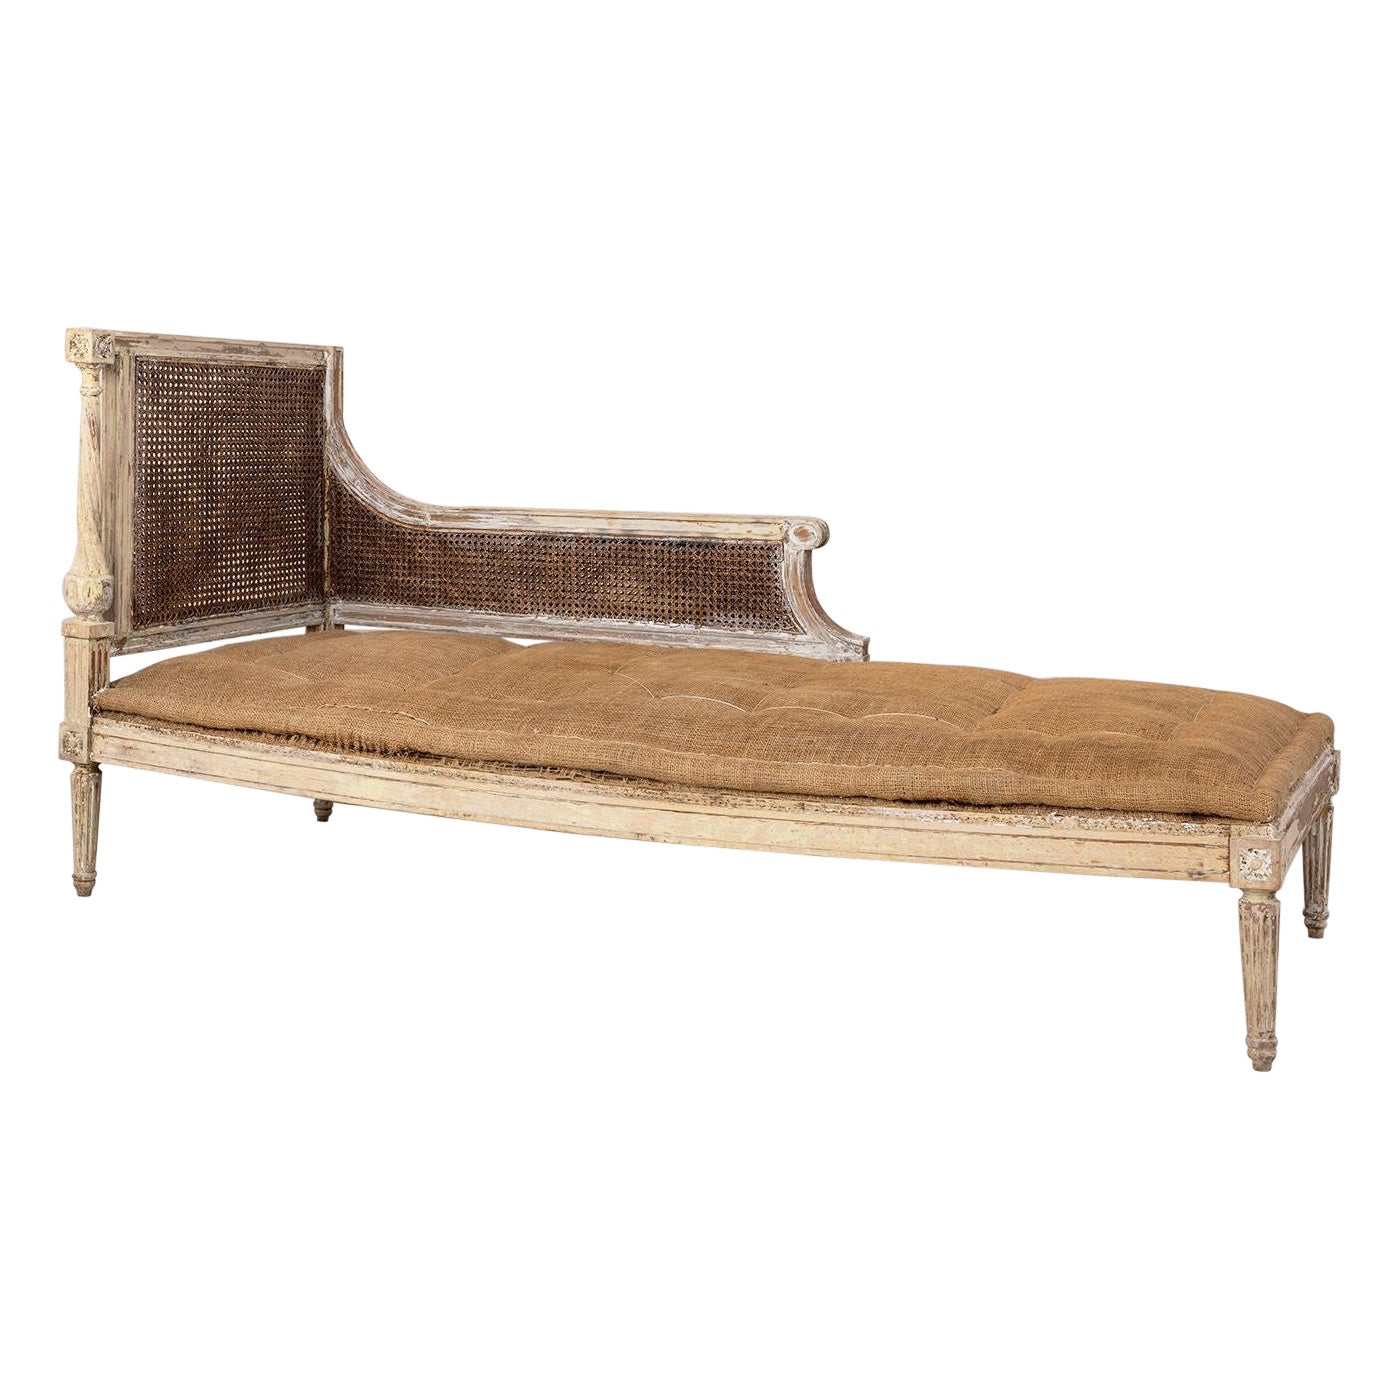 19th C. French Louis XVI Style Caned Chaise Lounge or Daybed